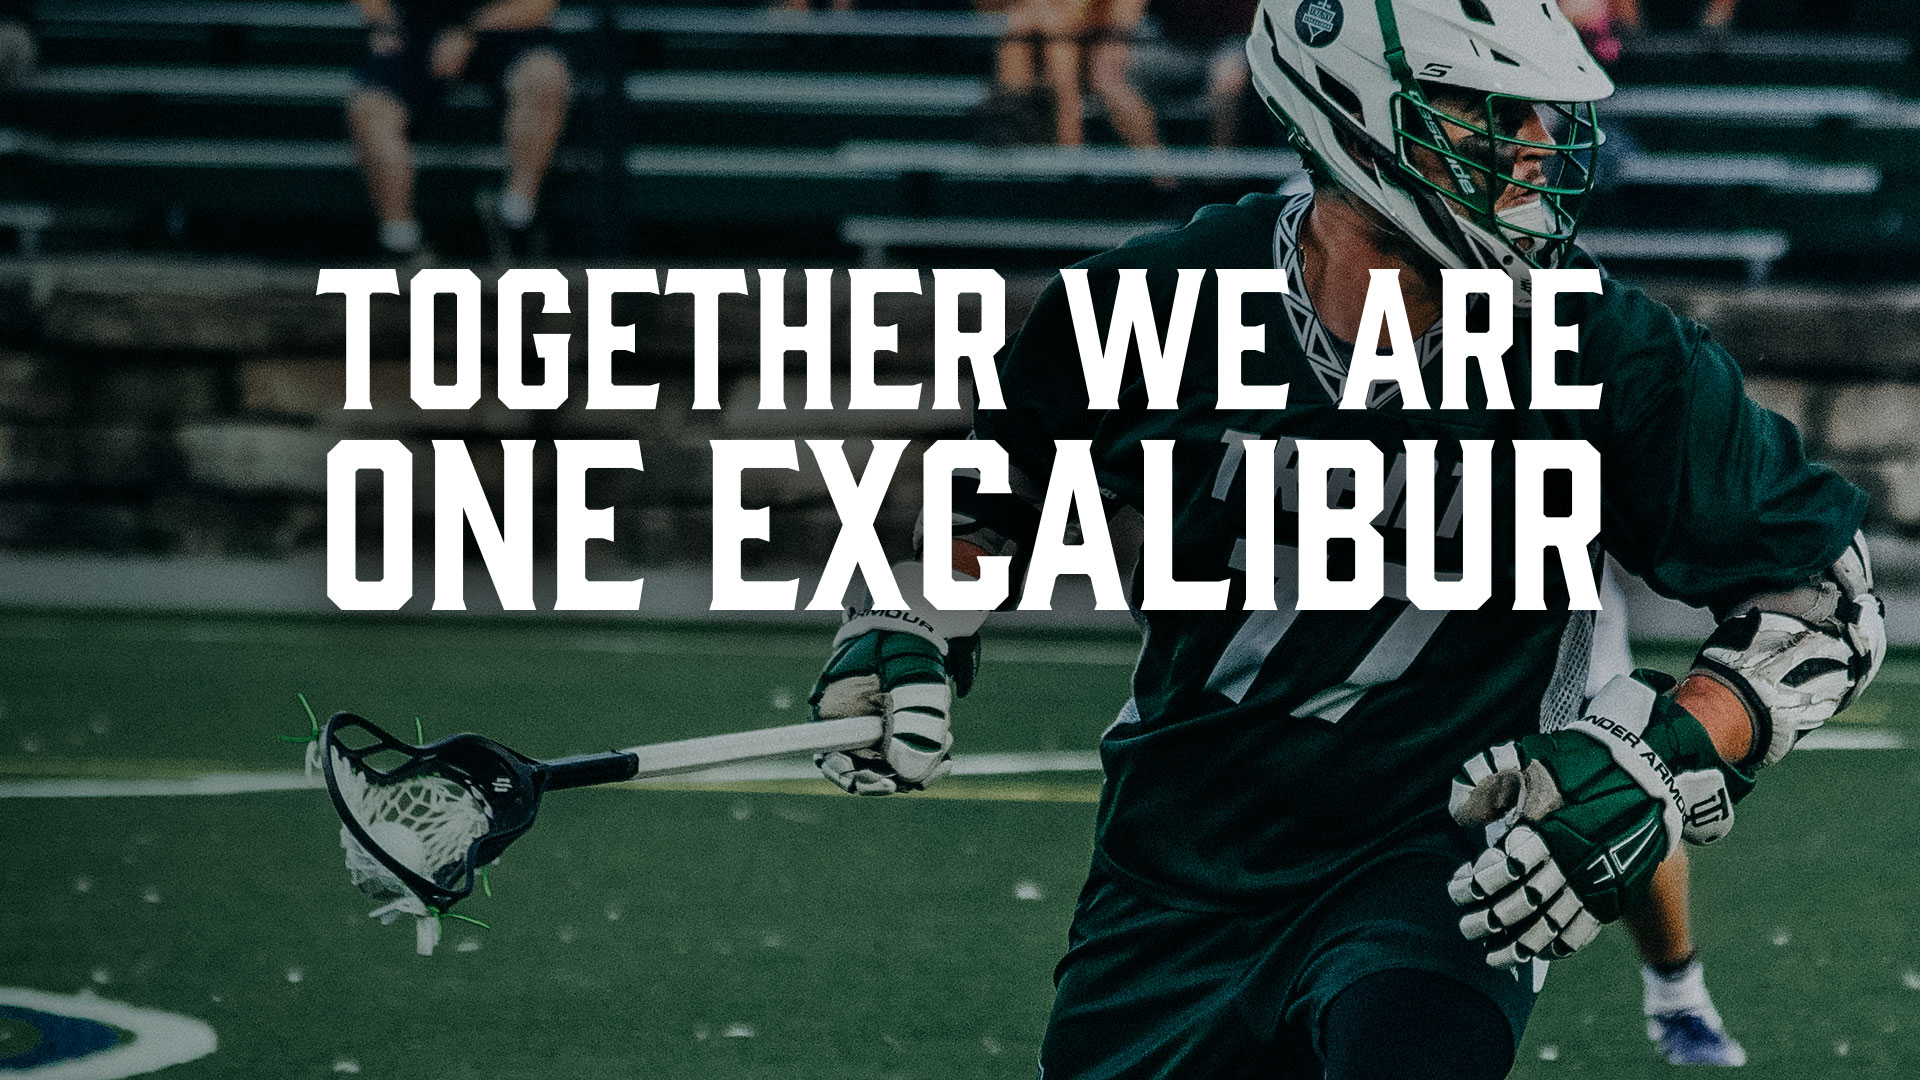 Together we are one Excalibur. Lacrosse image with text overlay. 